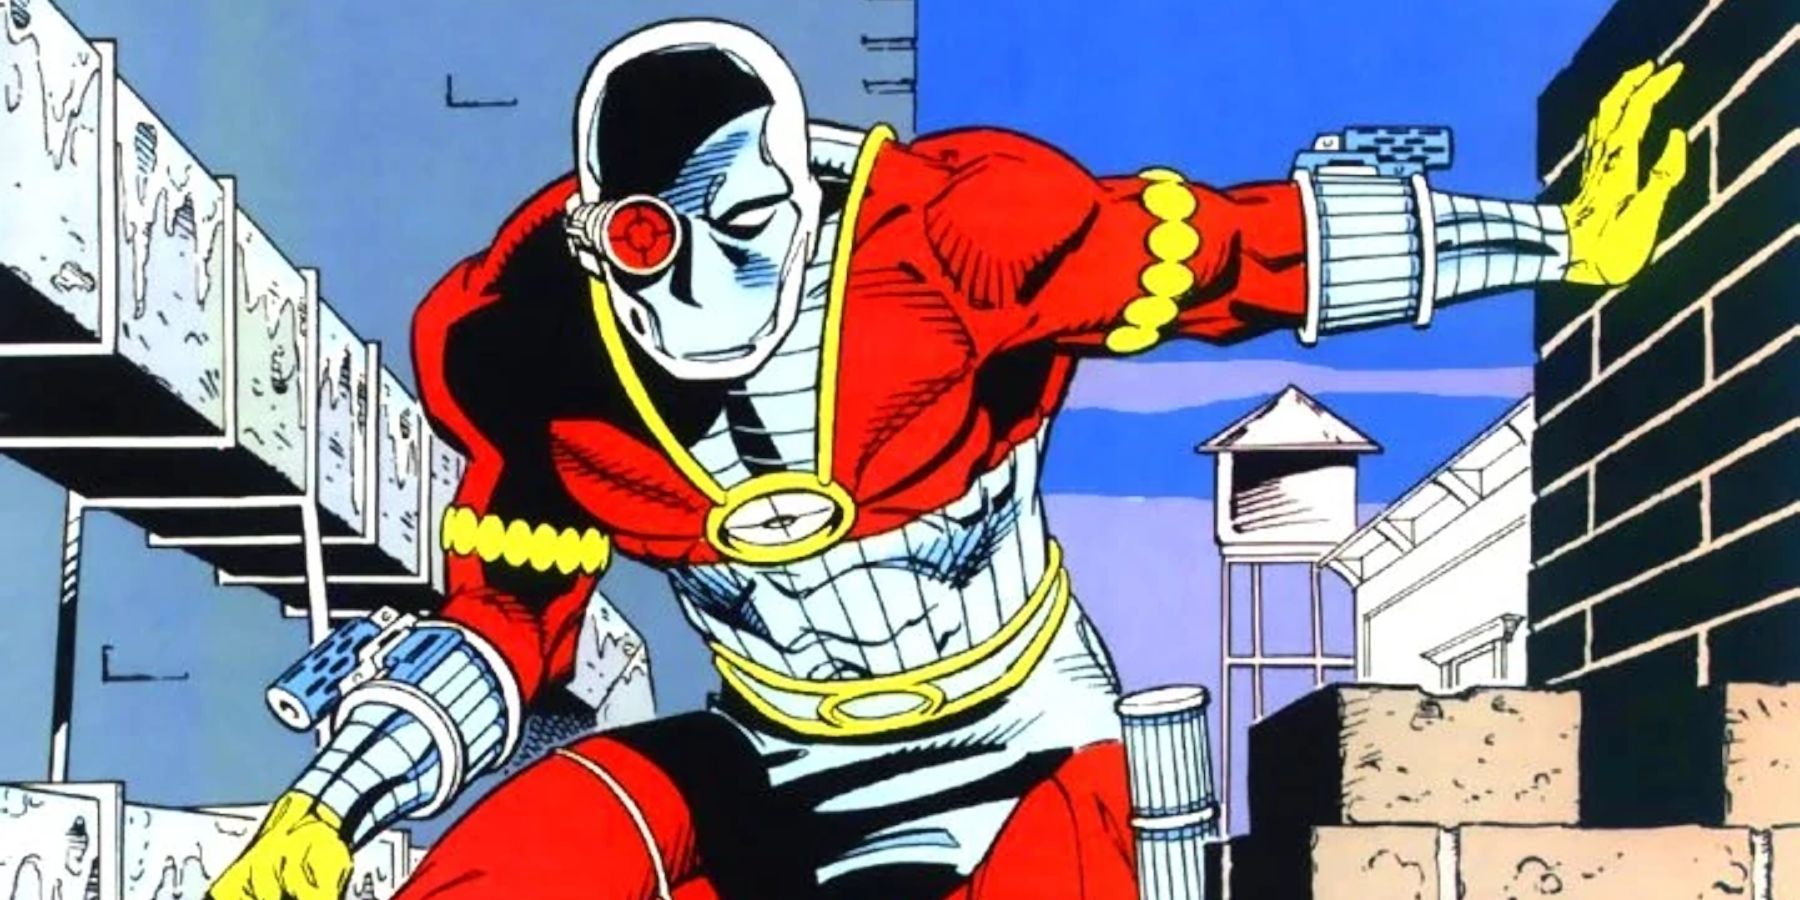 Deadshot lurking on a rooftop from DC Comics